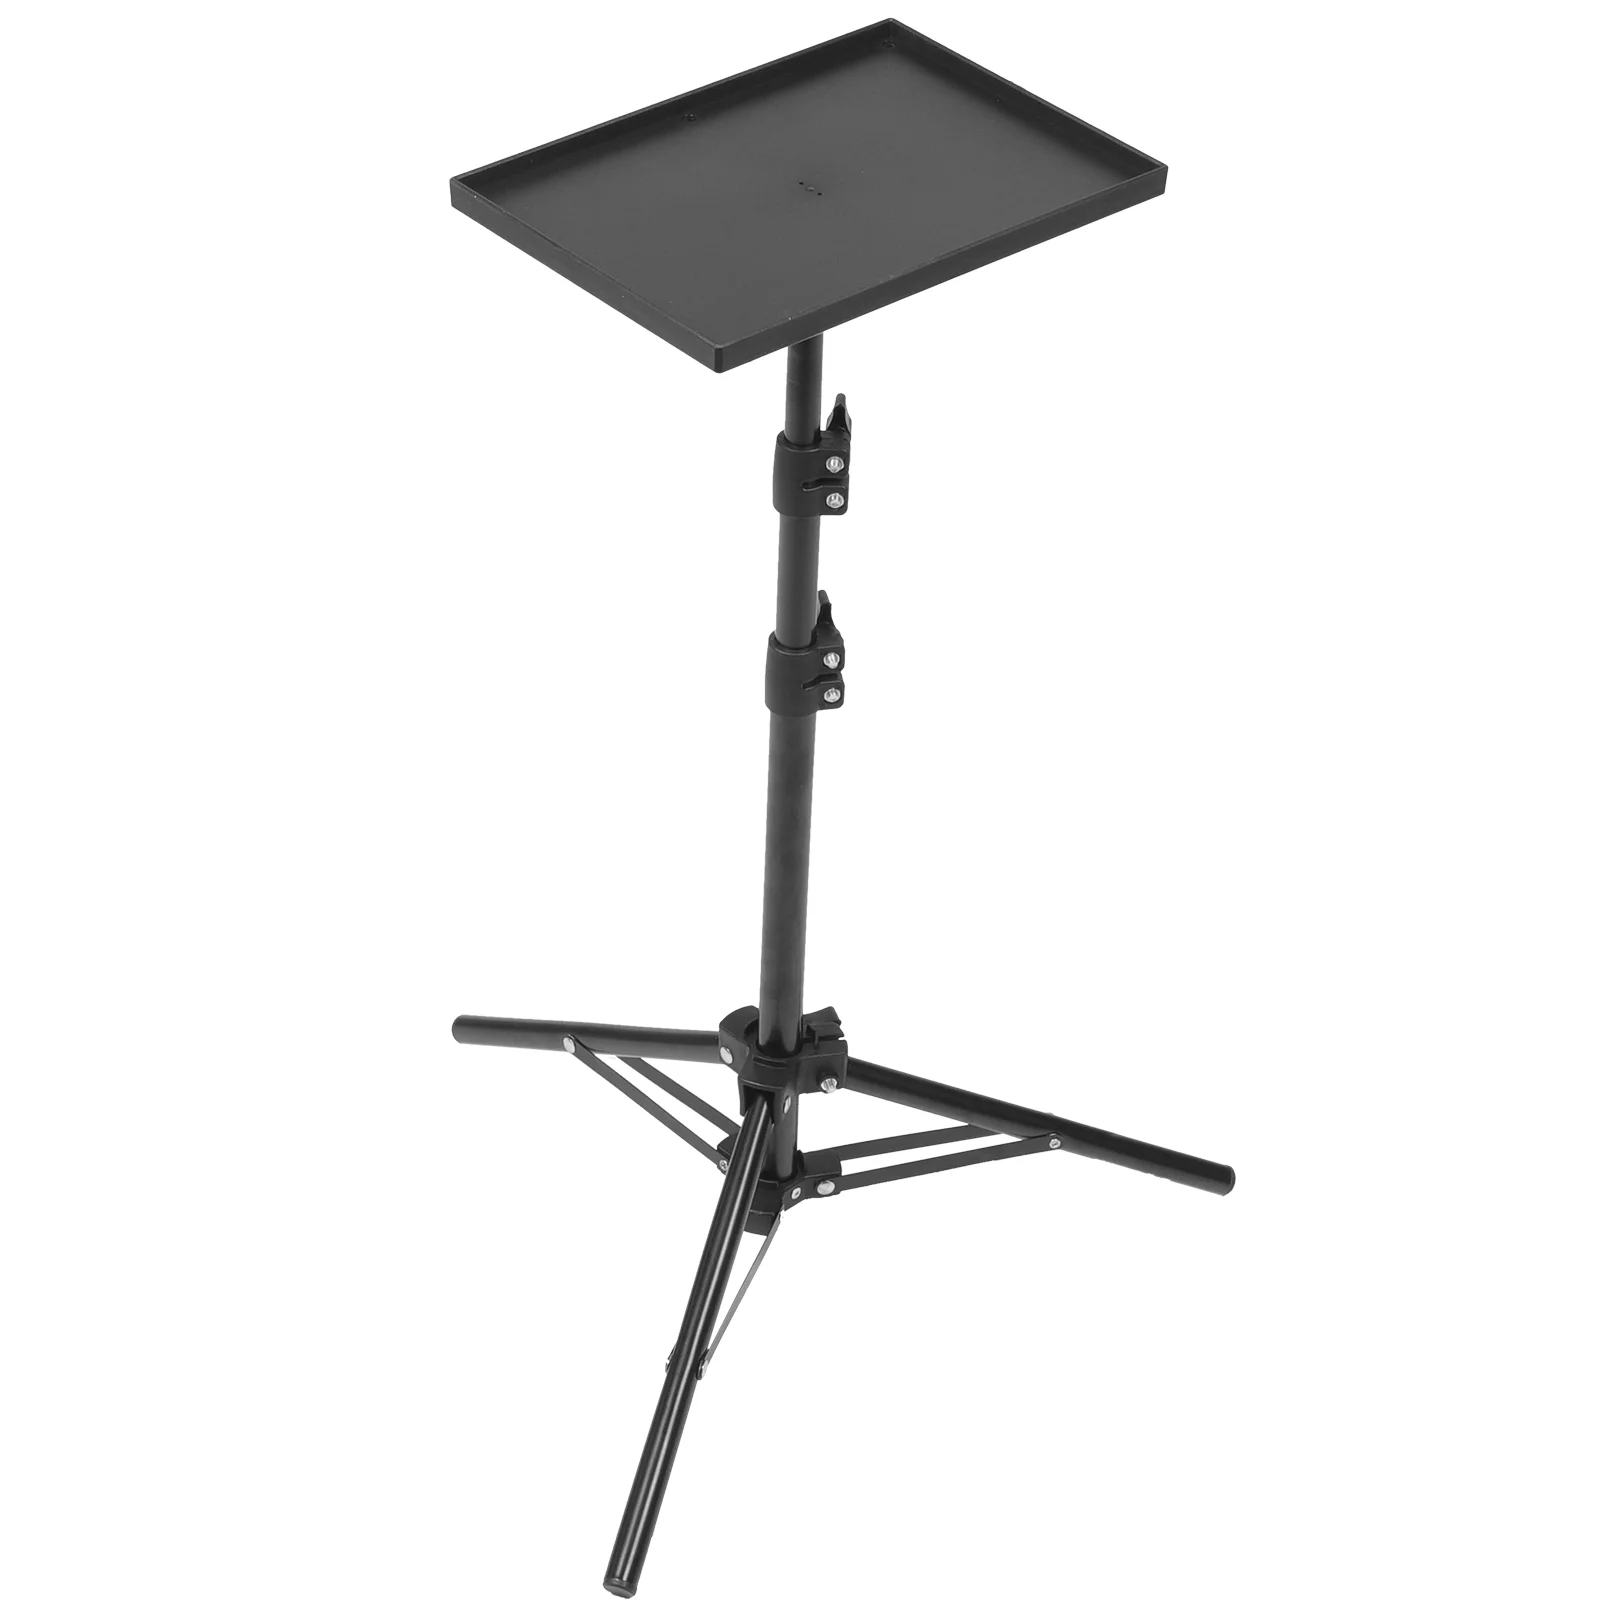 

120cm 55cm Projector Stand Laptop Stand Projector Tripod Adjustable Tabletop Floor Projector Stand Camera Holder Stand Bracket